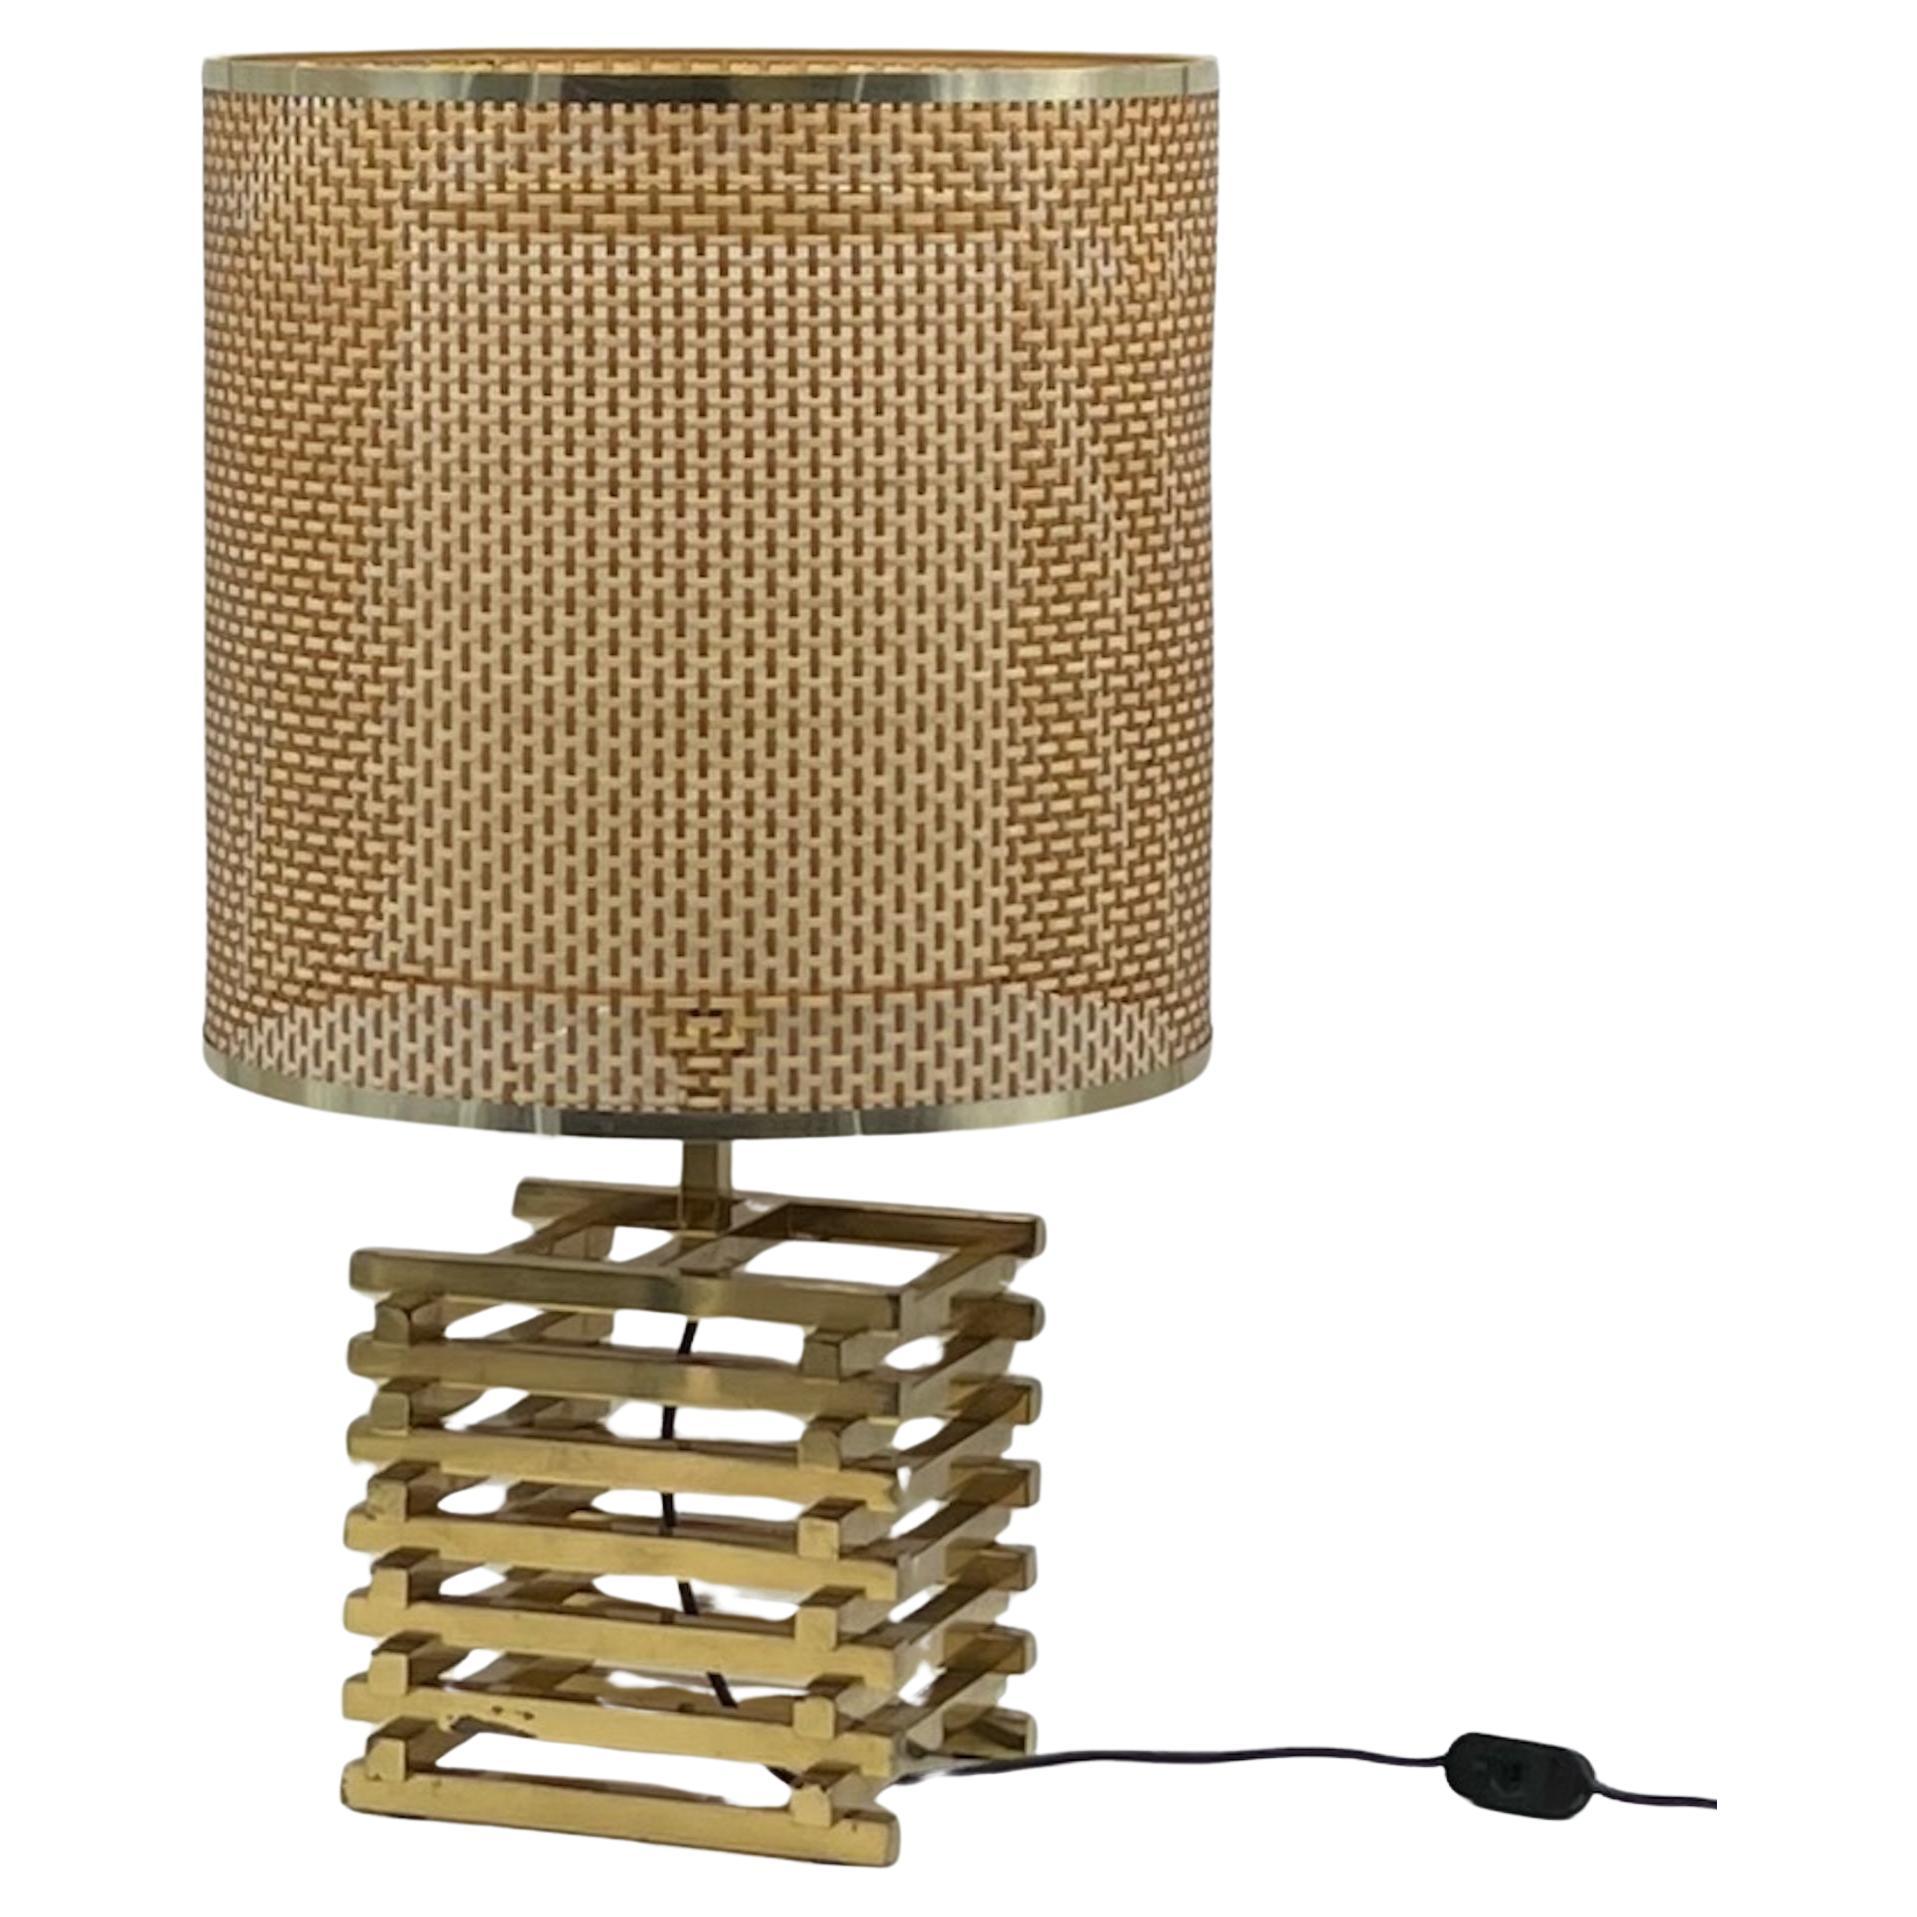 Large 'Spiga' Brass Table Lamp by Enrico Tronconi, 1960s For Sale